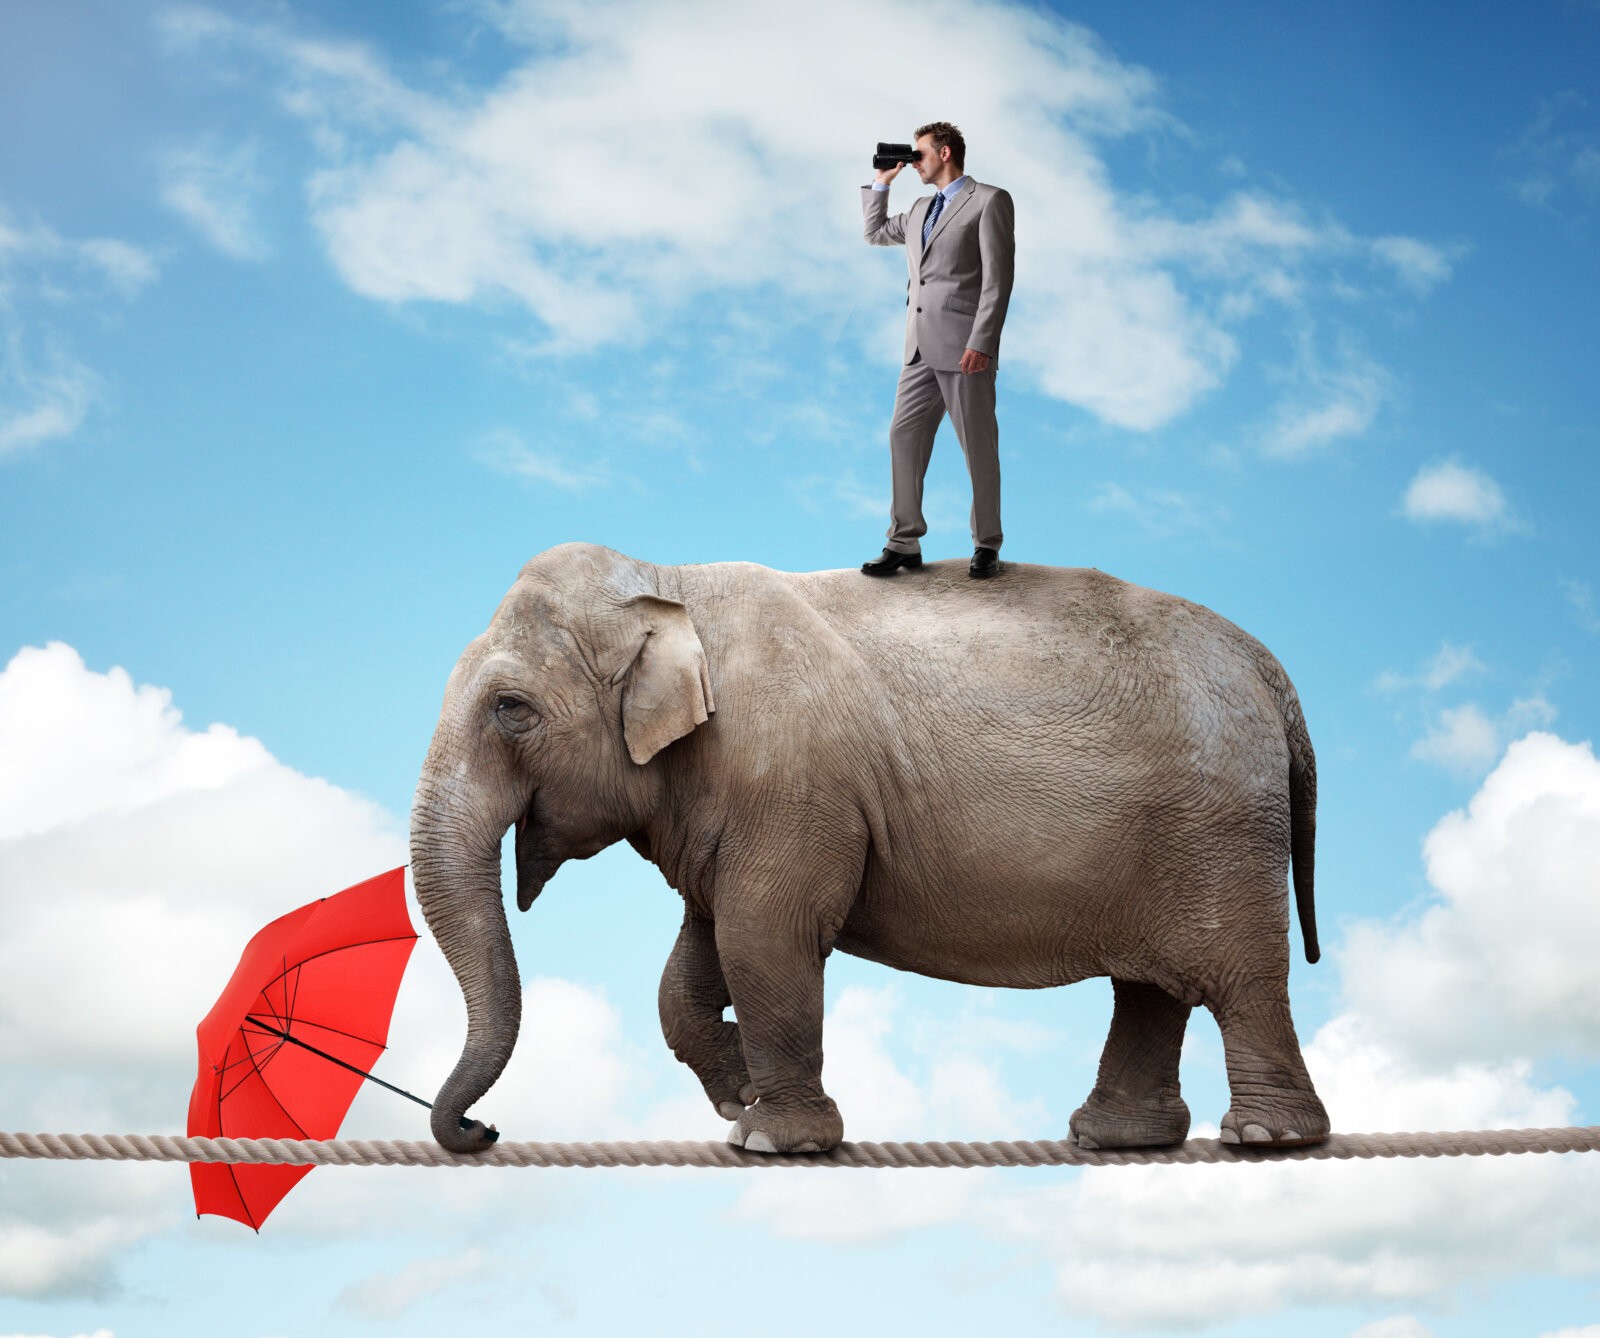 Businessman standing on top of elephant balancing on a tightrope looking th...